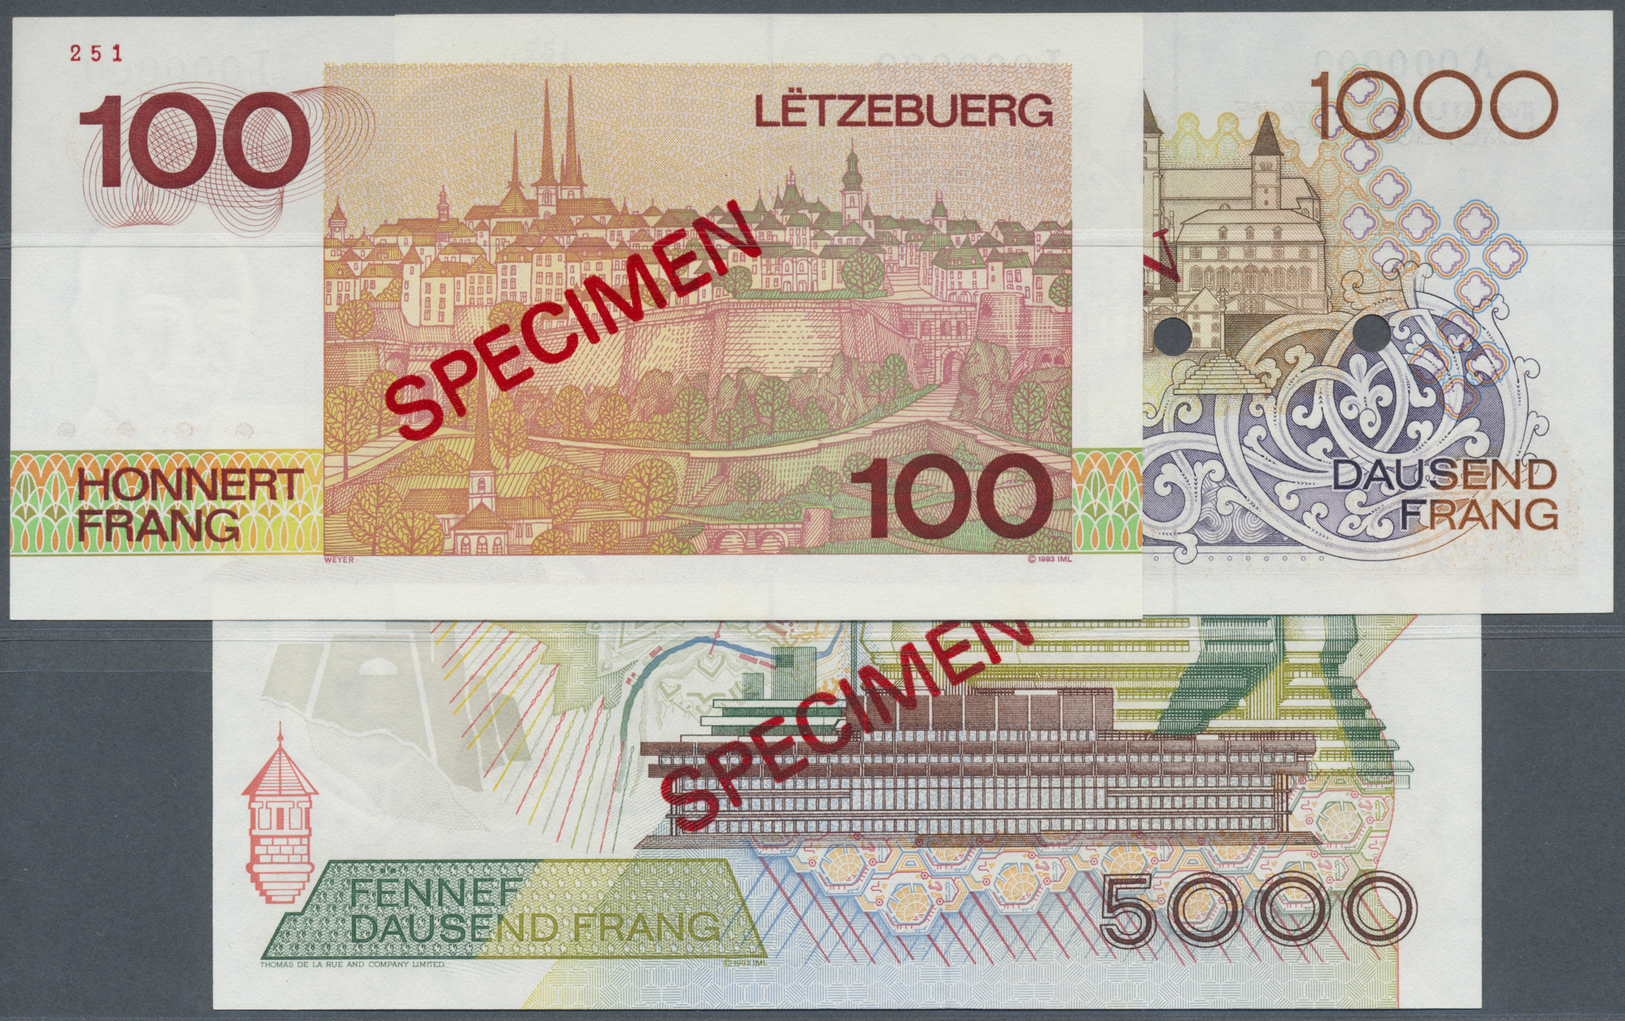 01598 Luxembourg: Set Of 3 Specimen Banknotes Containing 100 Francs P. 58s, 1000 Francs P. 59s And 5000 Francs P. 60s, A - Luxembourg